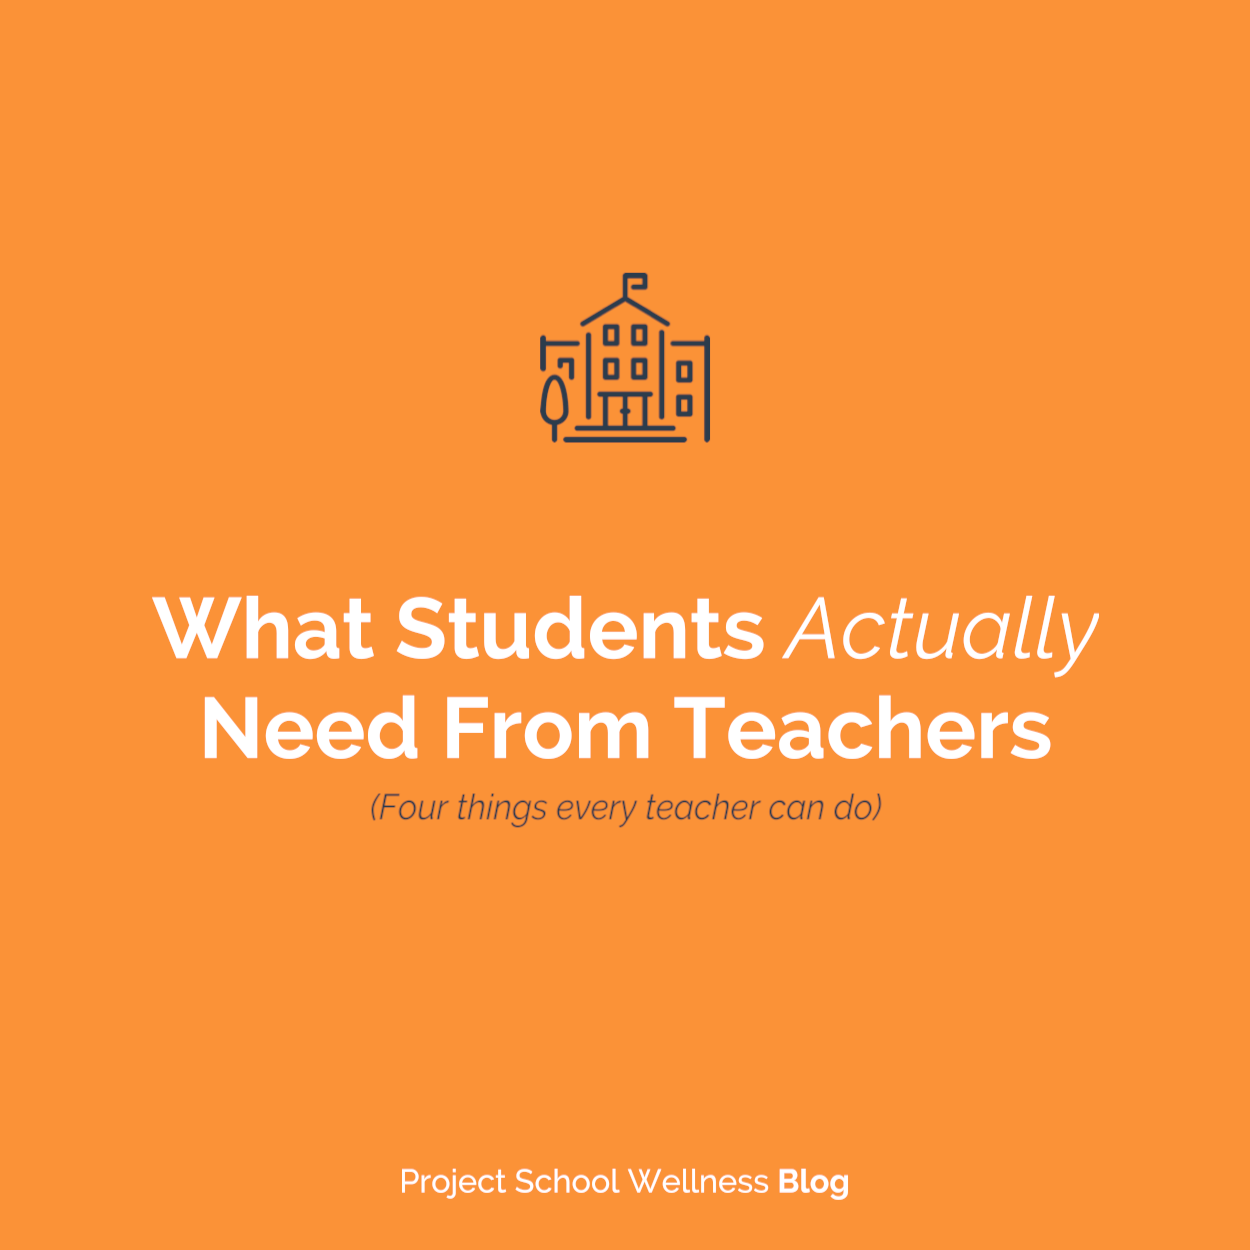 PSW Blog - What Students Actually Need From Teachers